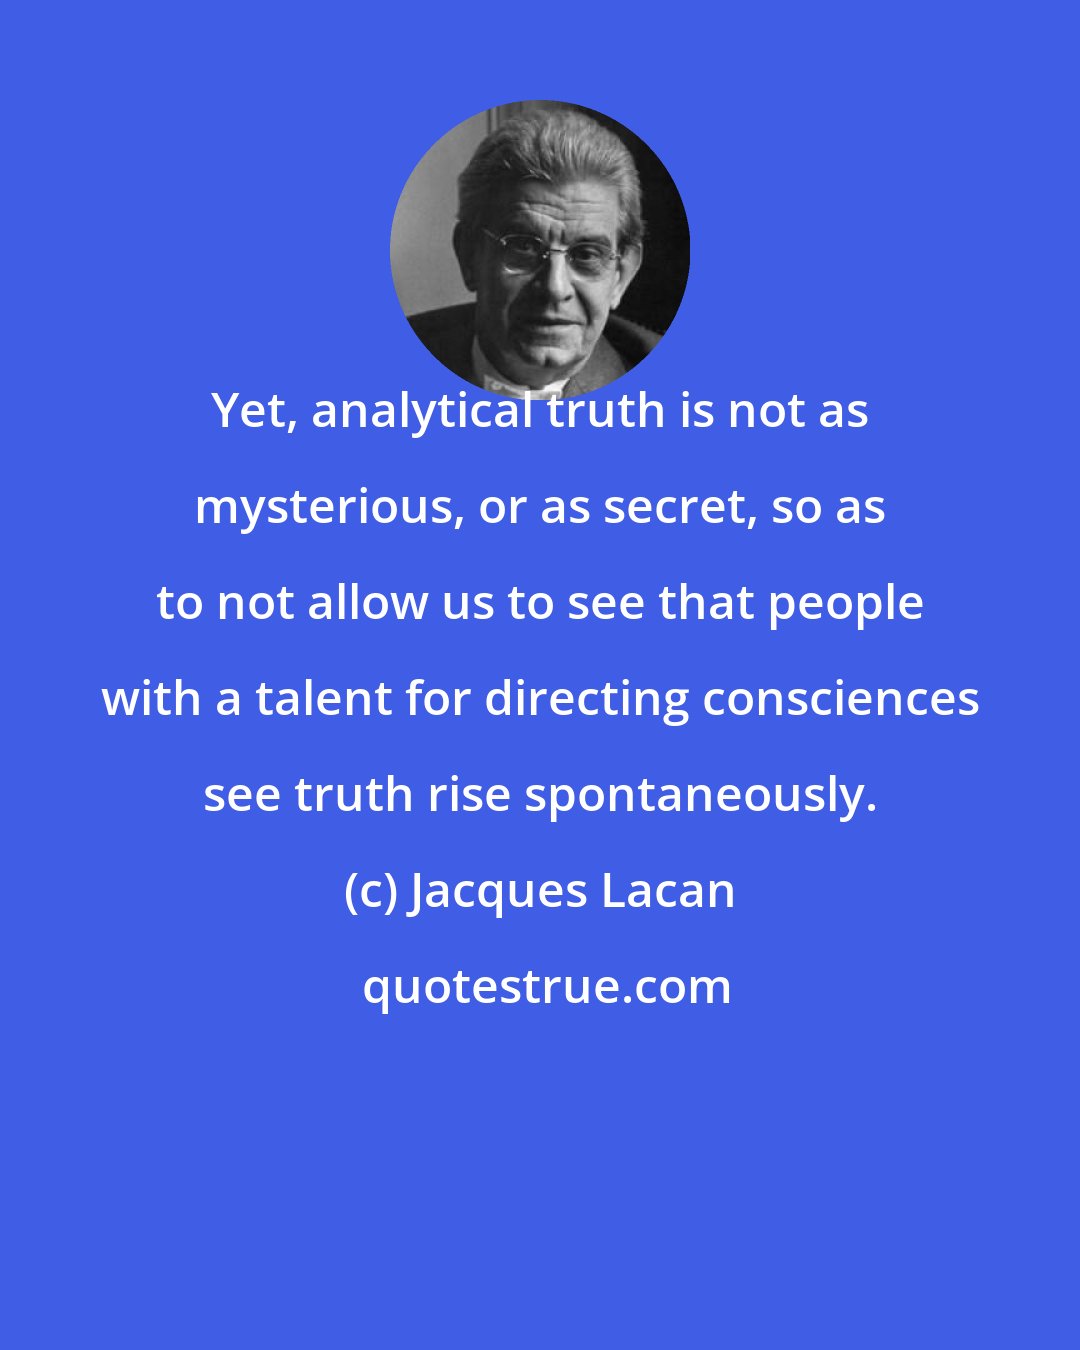 Jacques Lacan: Yet, analytical truth is not as mysterious, or as secret, so as to not allow us to see that people with a talent for directing consciences see truth rise spontaneously.